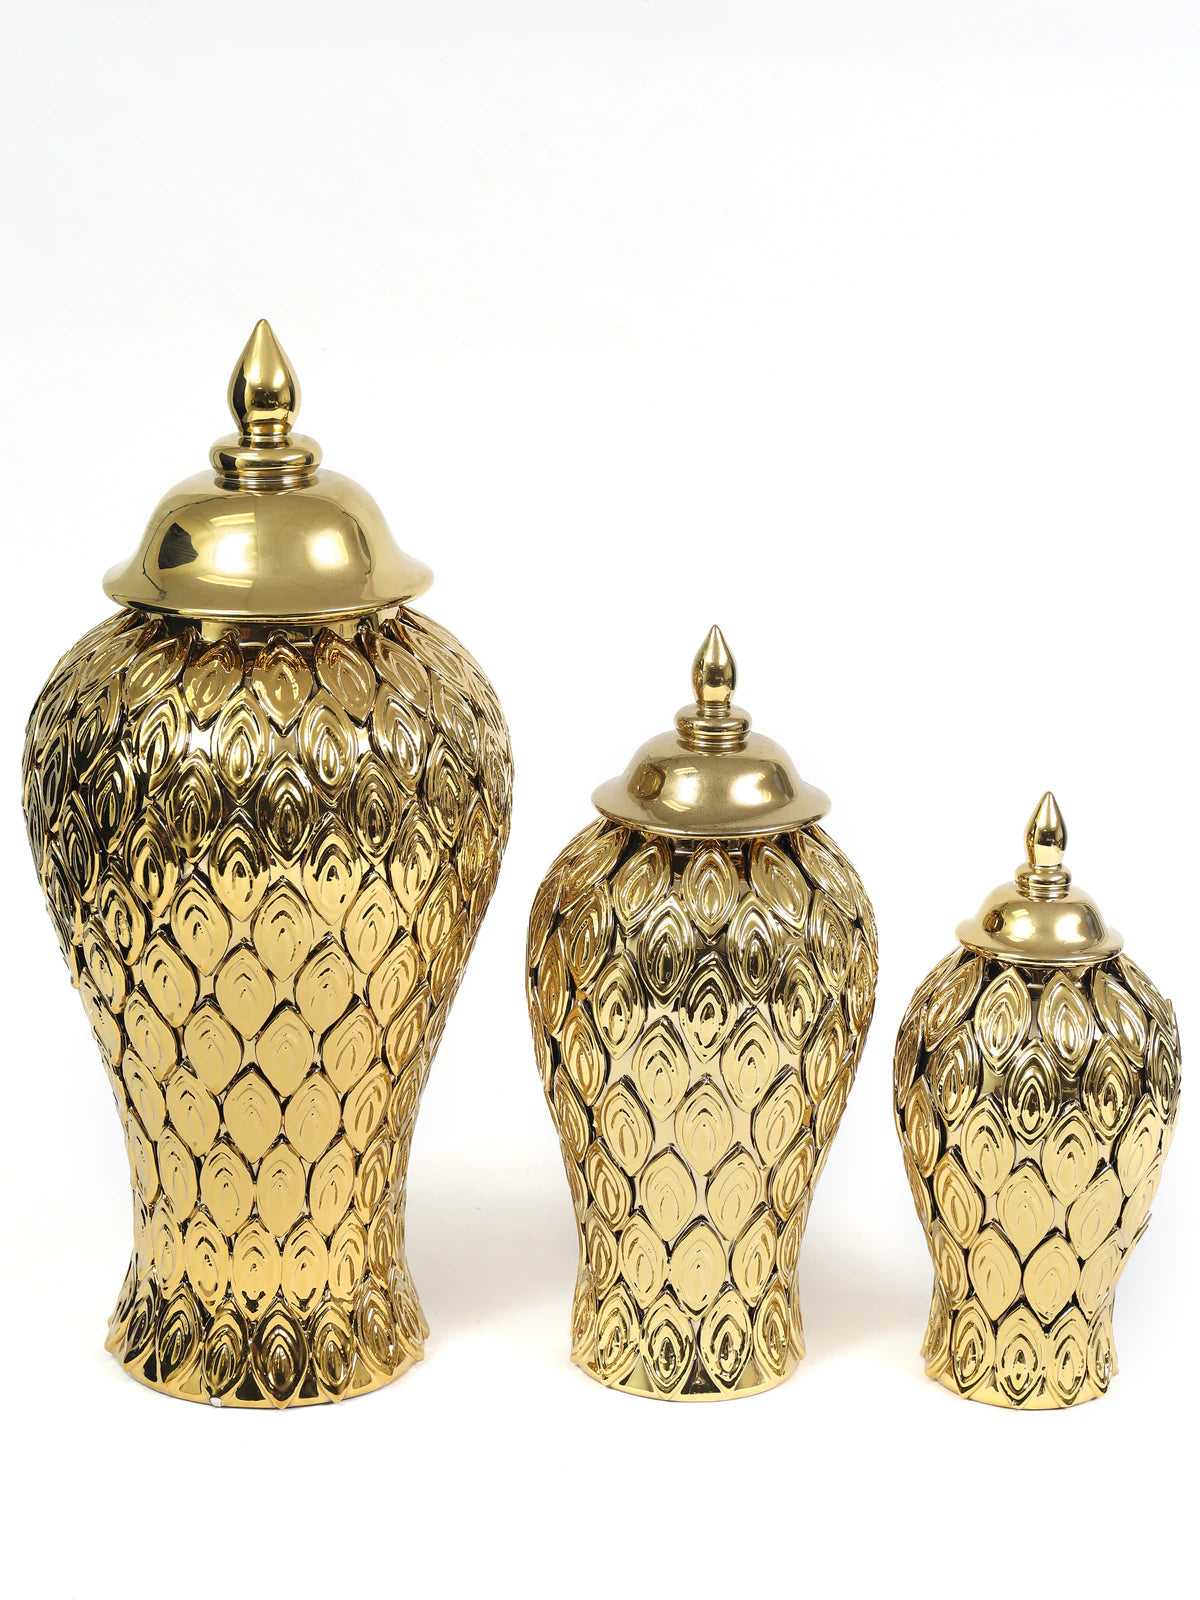 Gold Flower Petal Ceramic Ginger Jar with Lid. Available in 3 Sizes, Sold by KYA Home Decor.